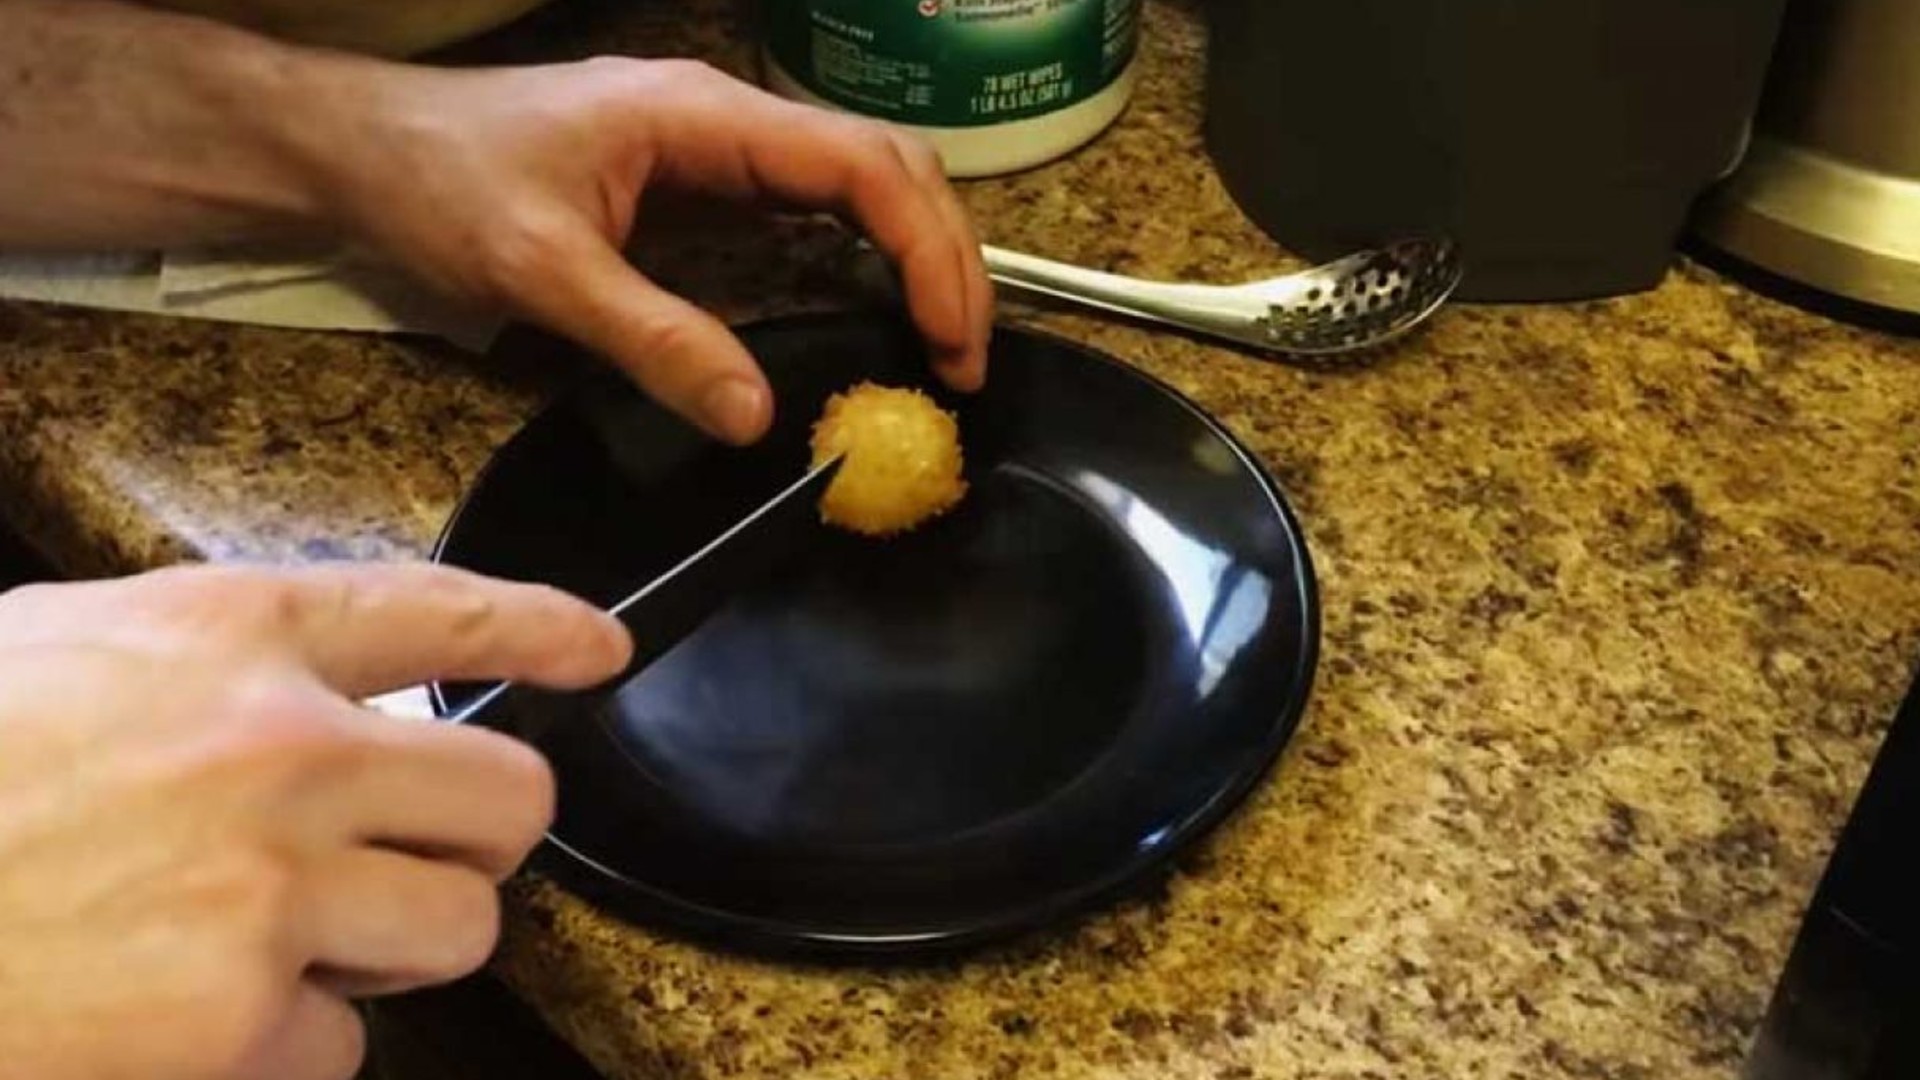 Deep Fried Water Is The Latest Food Trend That We’re Finding It Hard To Digest